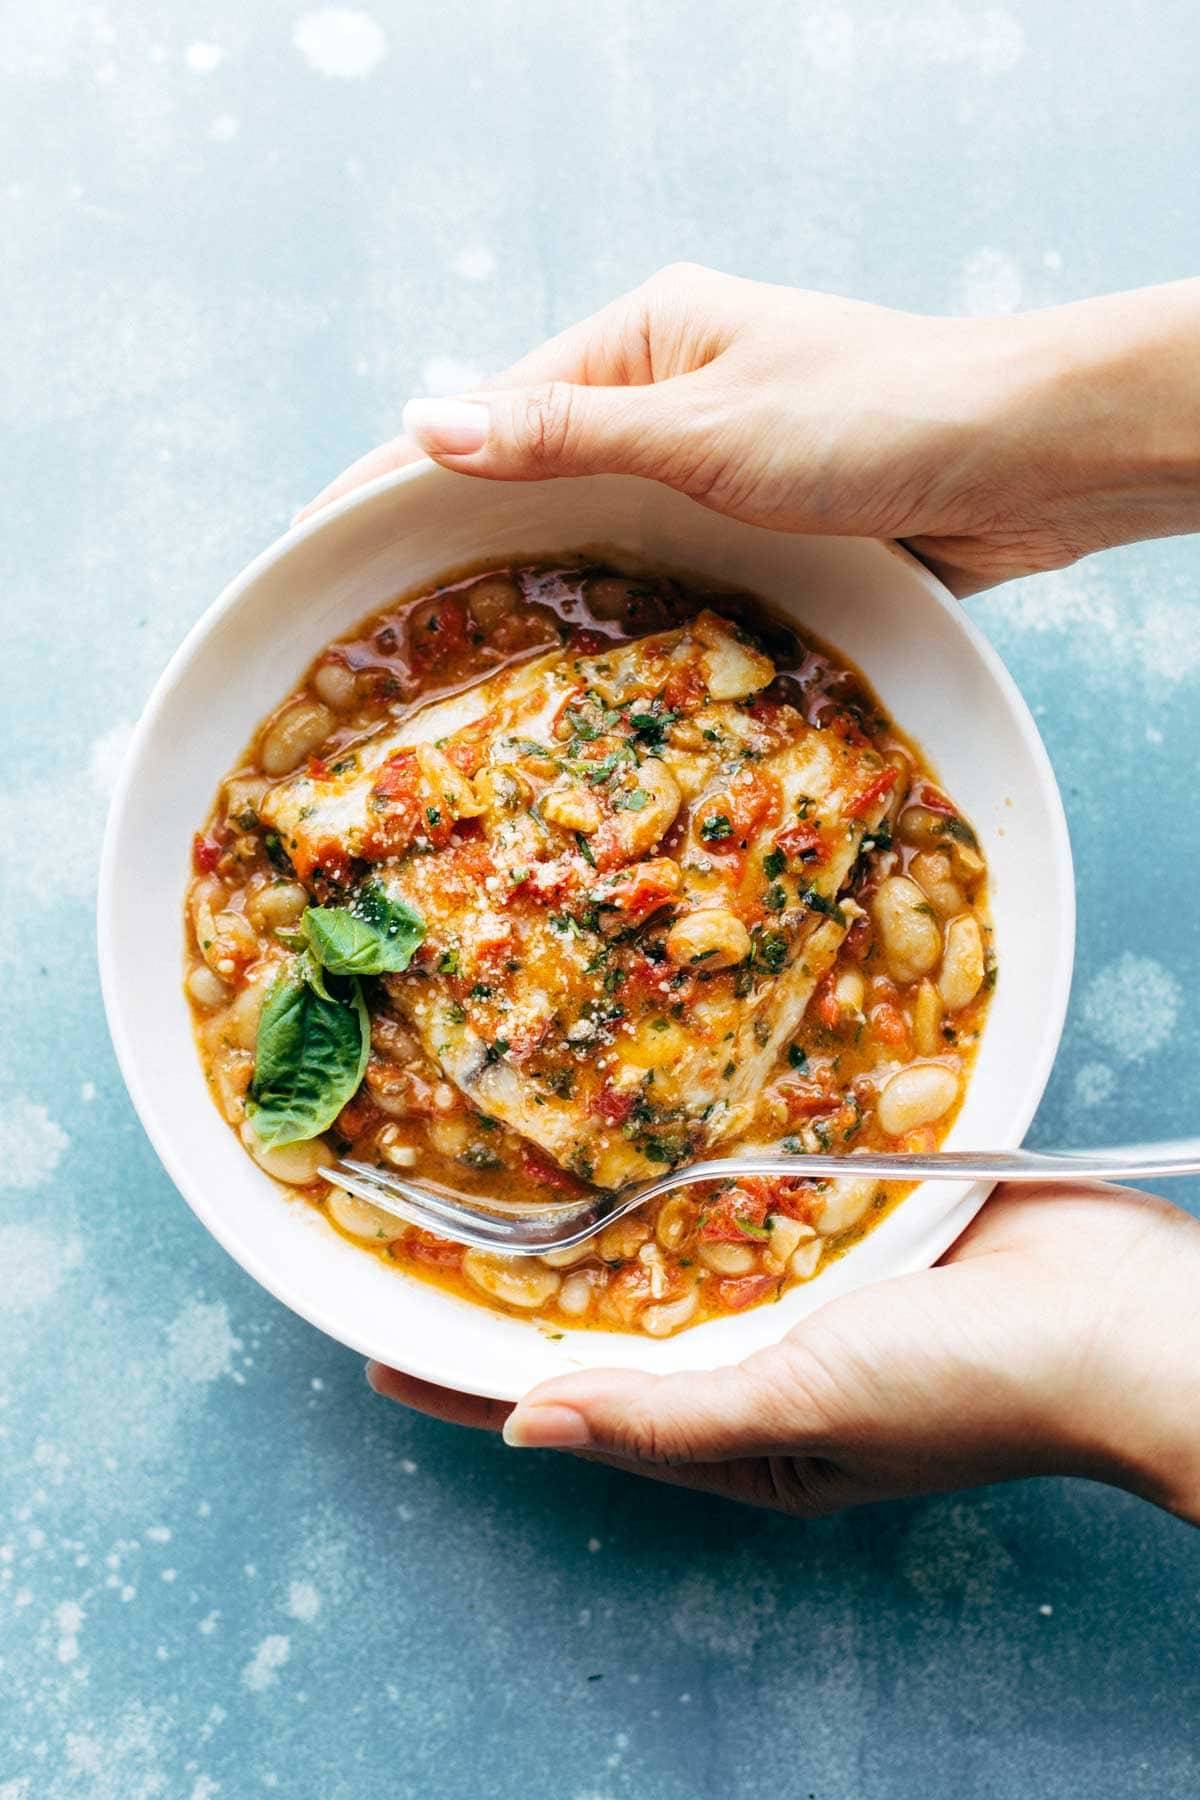 Garlic Basil Barramundi Skillet with Tomato Butter Sauce! SO YUMMY and super easy, with basic ingredients like garlic, basil, tomatoes, white beans, Parmesan, and white fish. Perfect with a green salad and crusty bread. | pinchofyum.com